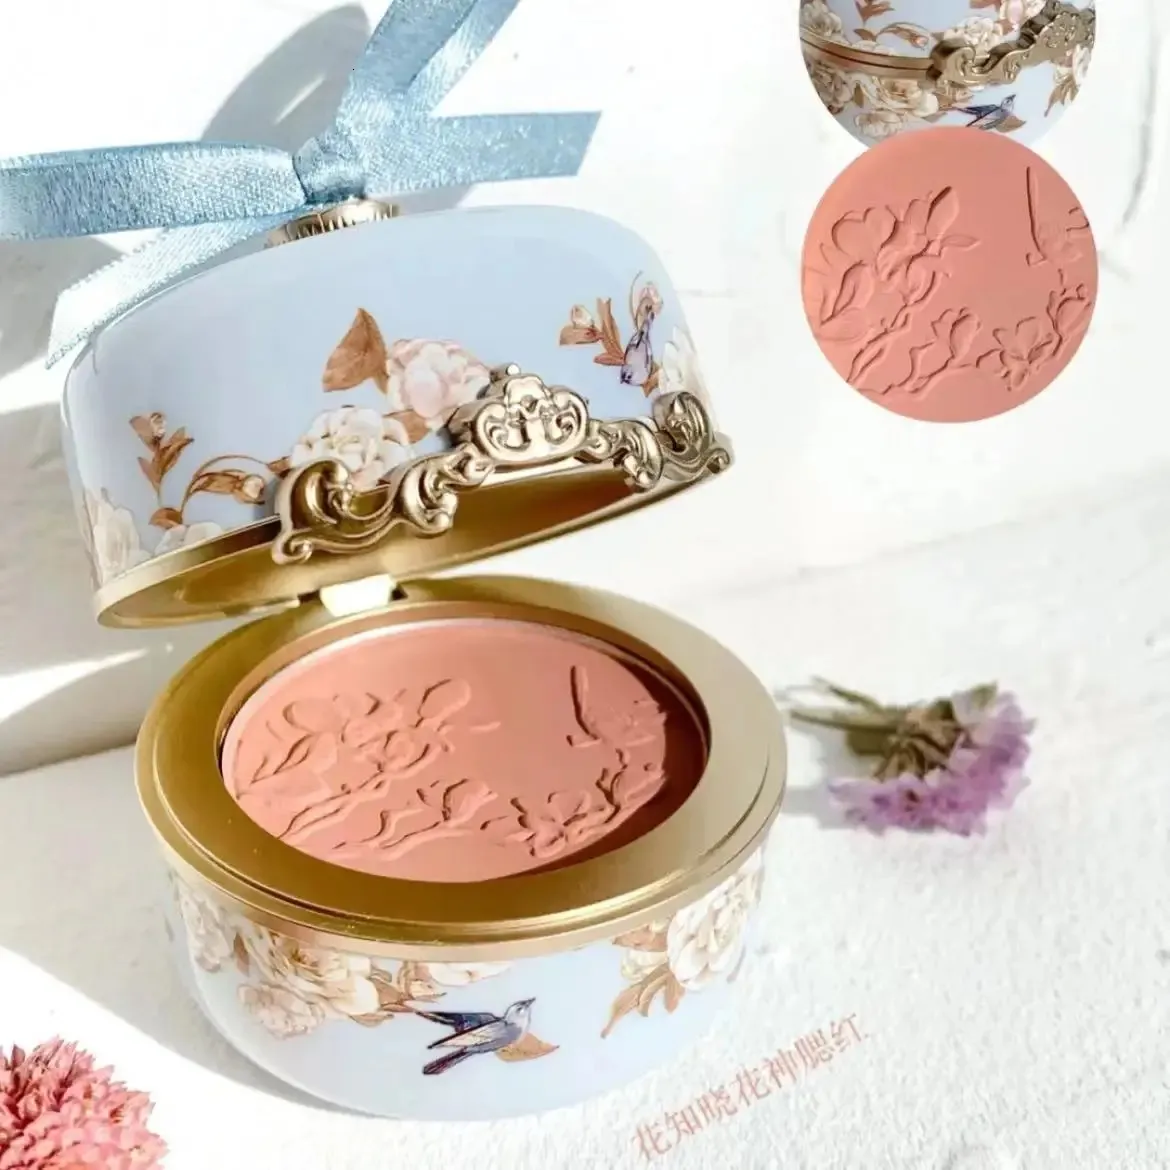 Blush Limited Edition Flower Knows Relief Powder Blush National Style Ljud Slow Easy Young Fairy White Skin 231114